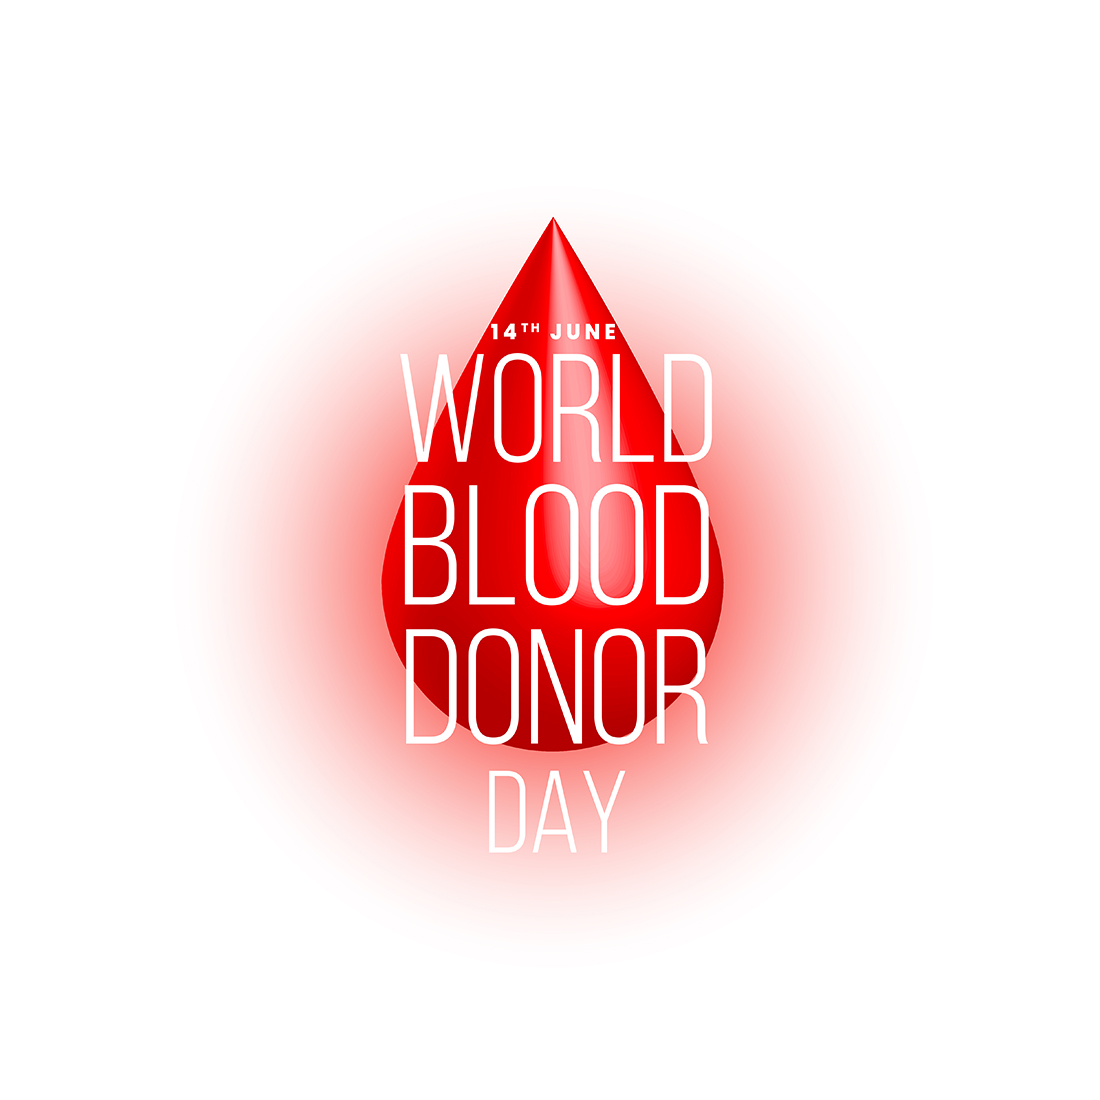 World blood donor day 3 design template cover image.